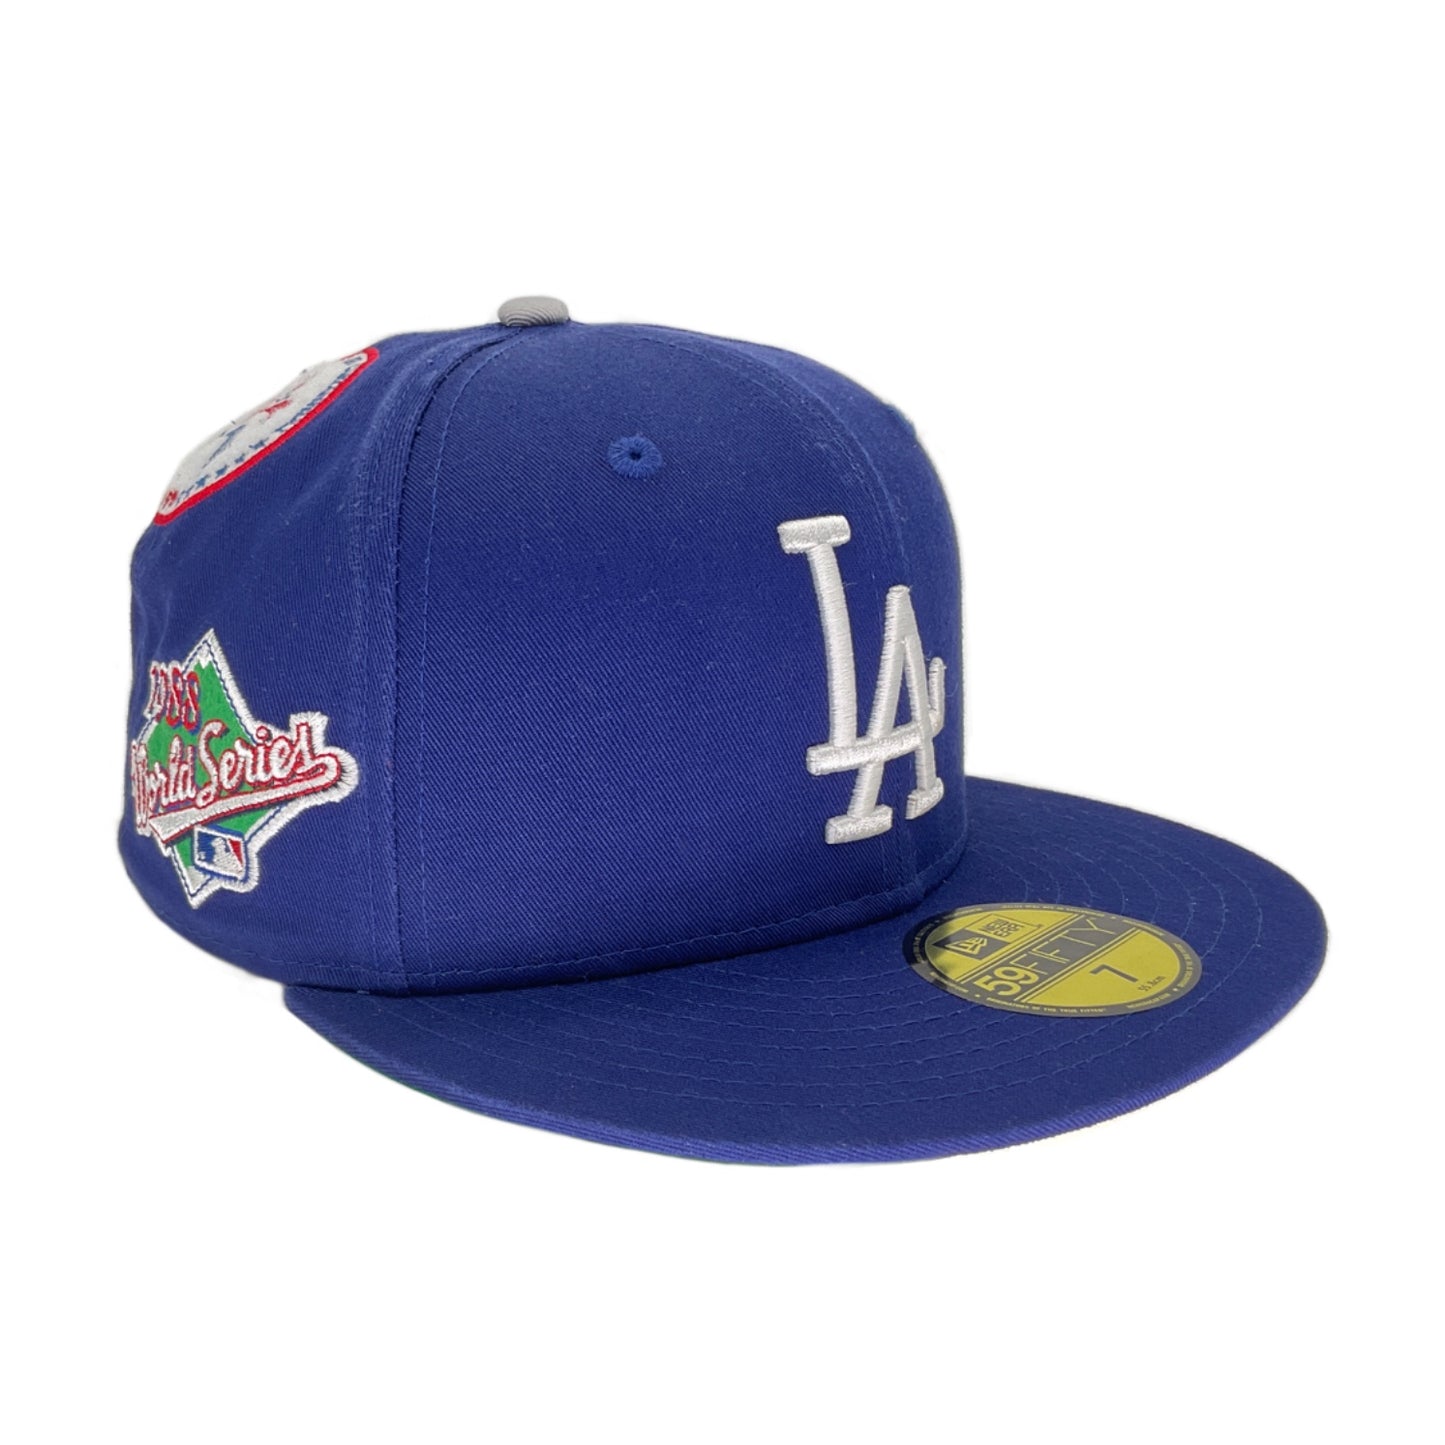 Los Angeles Dodgers Cooperstown Patches New Era Cap Blue